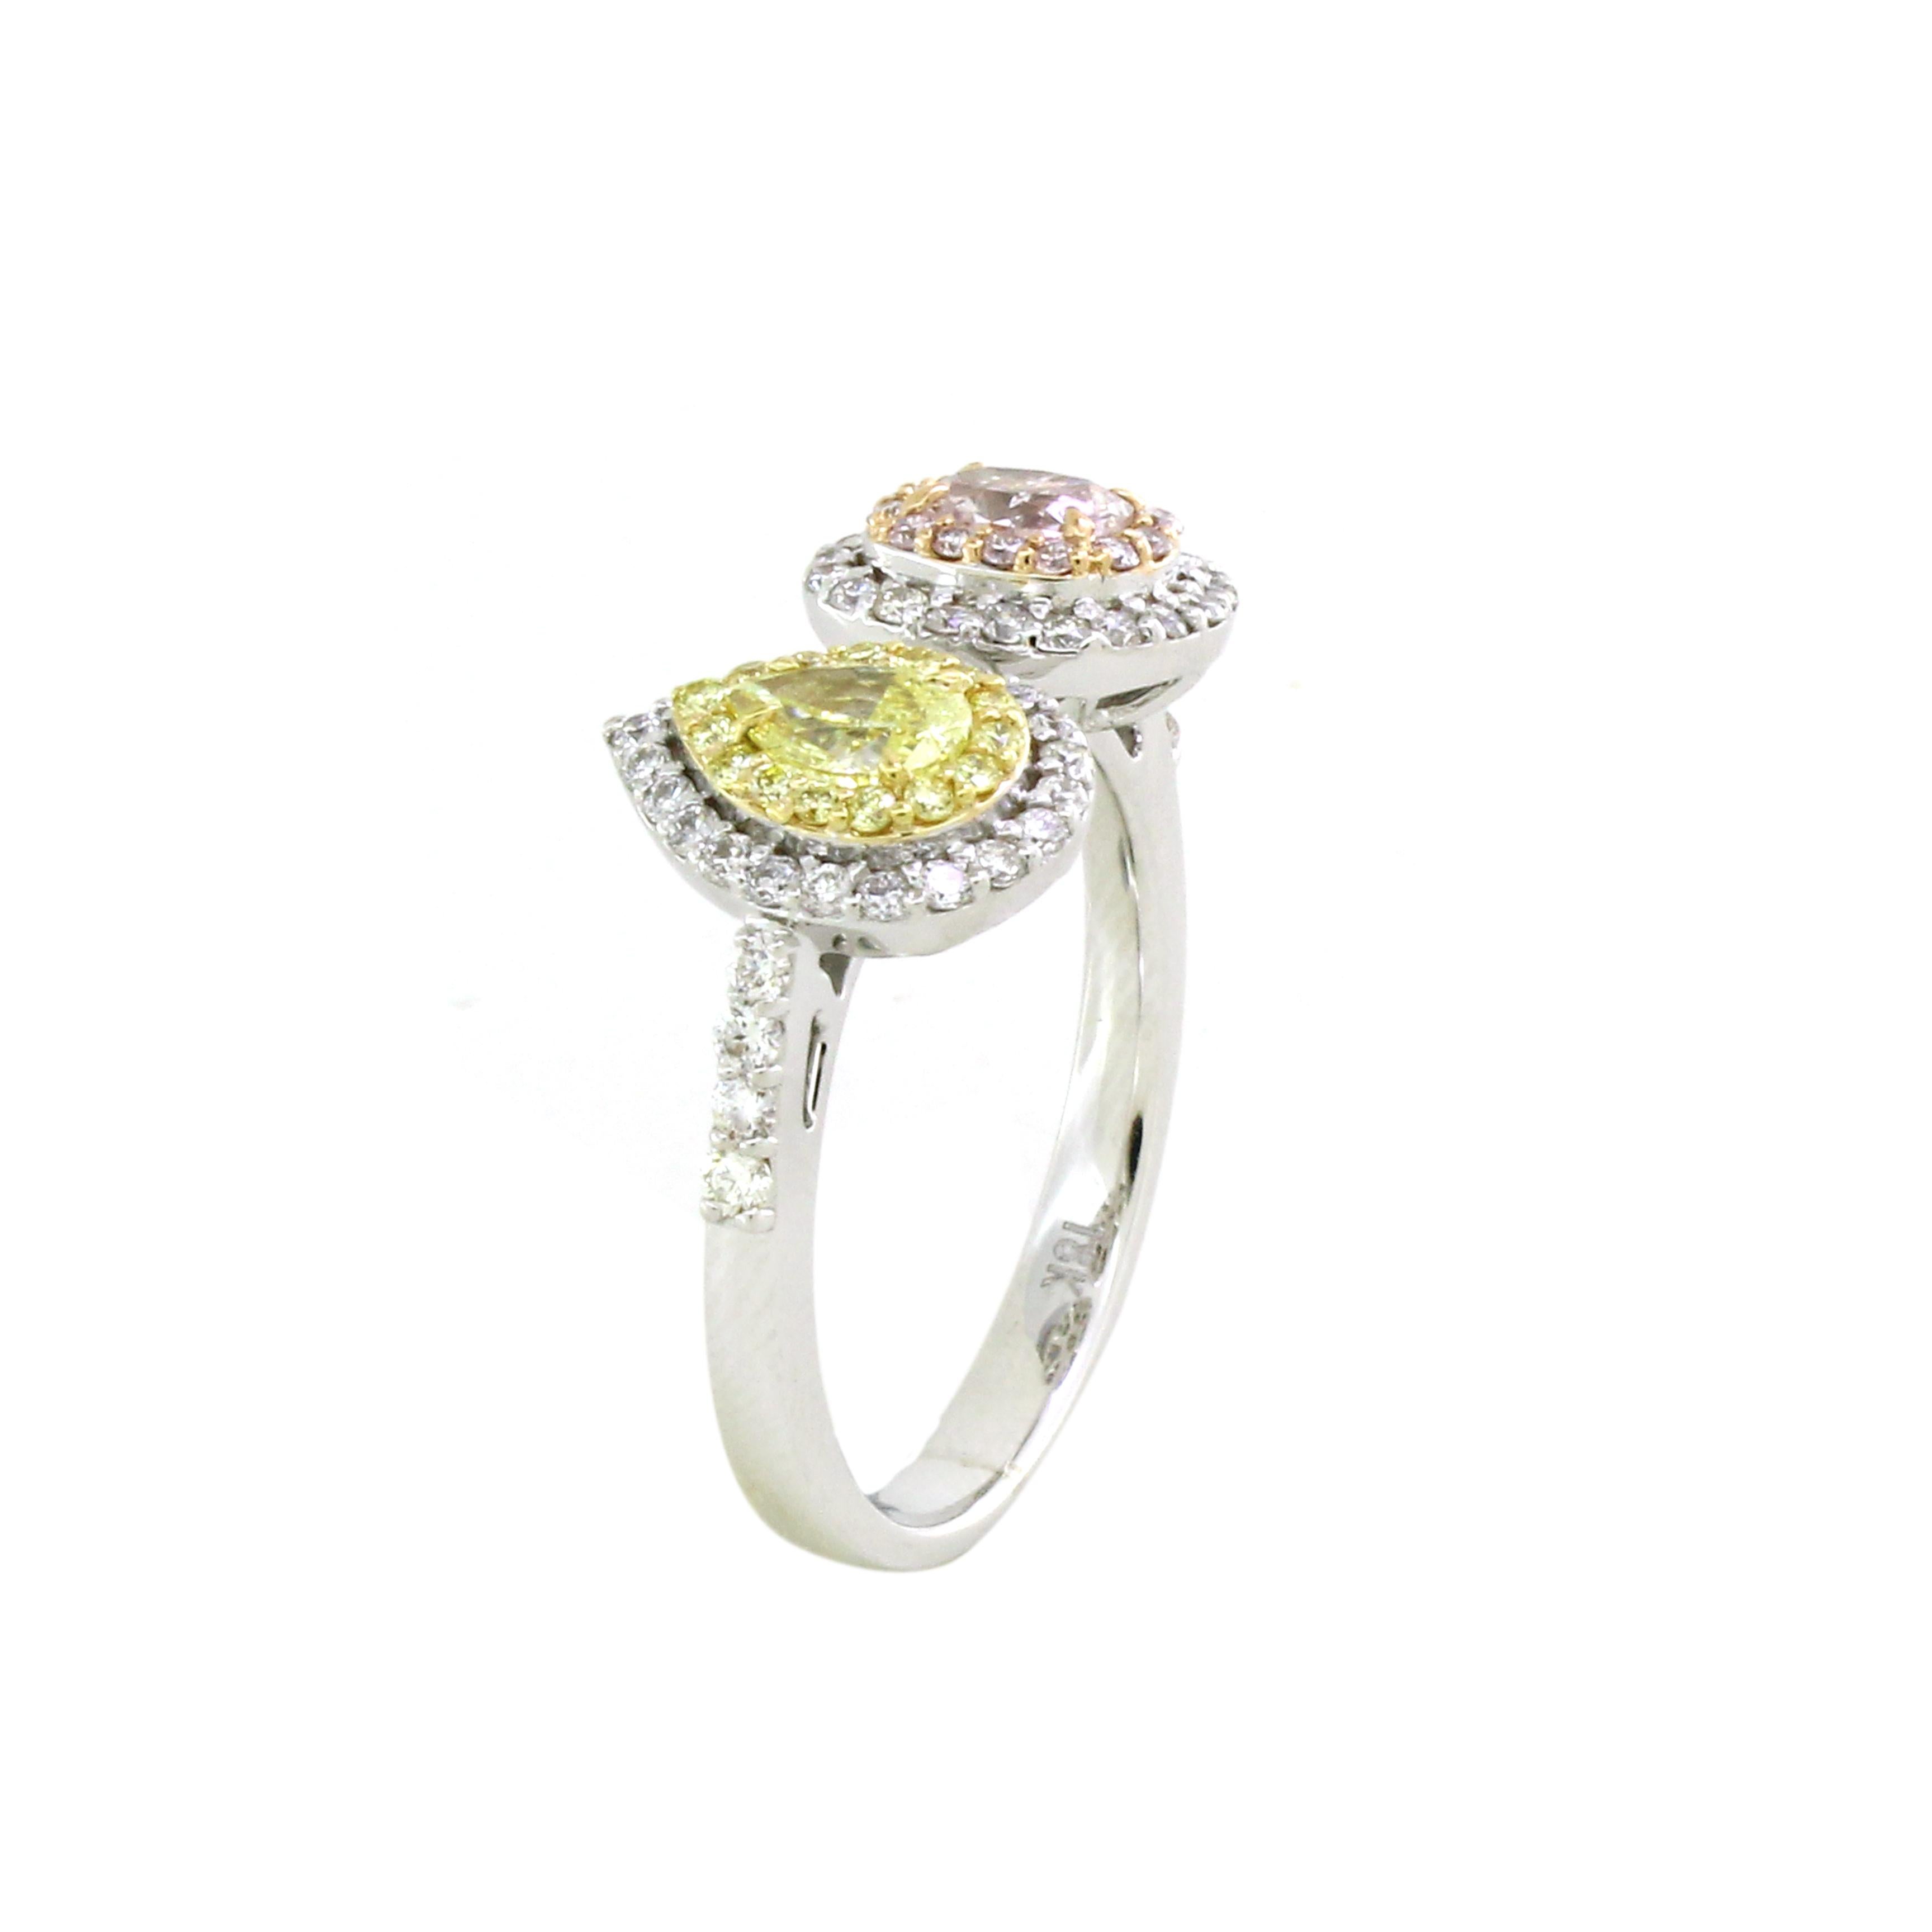 This Toi-et-Moi ring features a captivating dual-center design, where two distinct gemstones take center stage. 
The first centerpiece is a brilliant pear-shaped yellow diamond, weighing 0.3 carats. The pear-shaped cut exudes grace and timelessness,